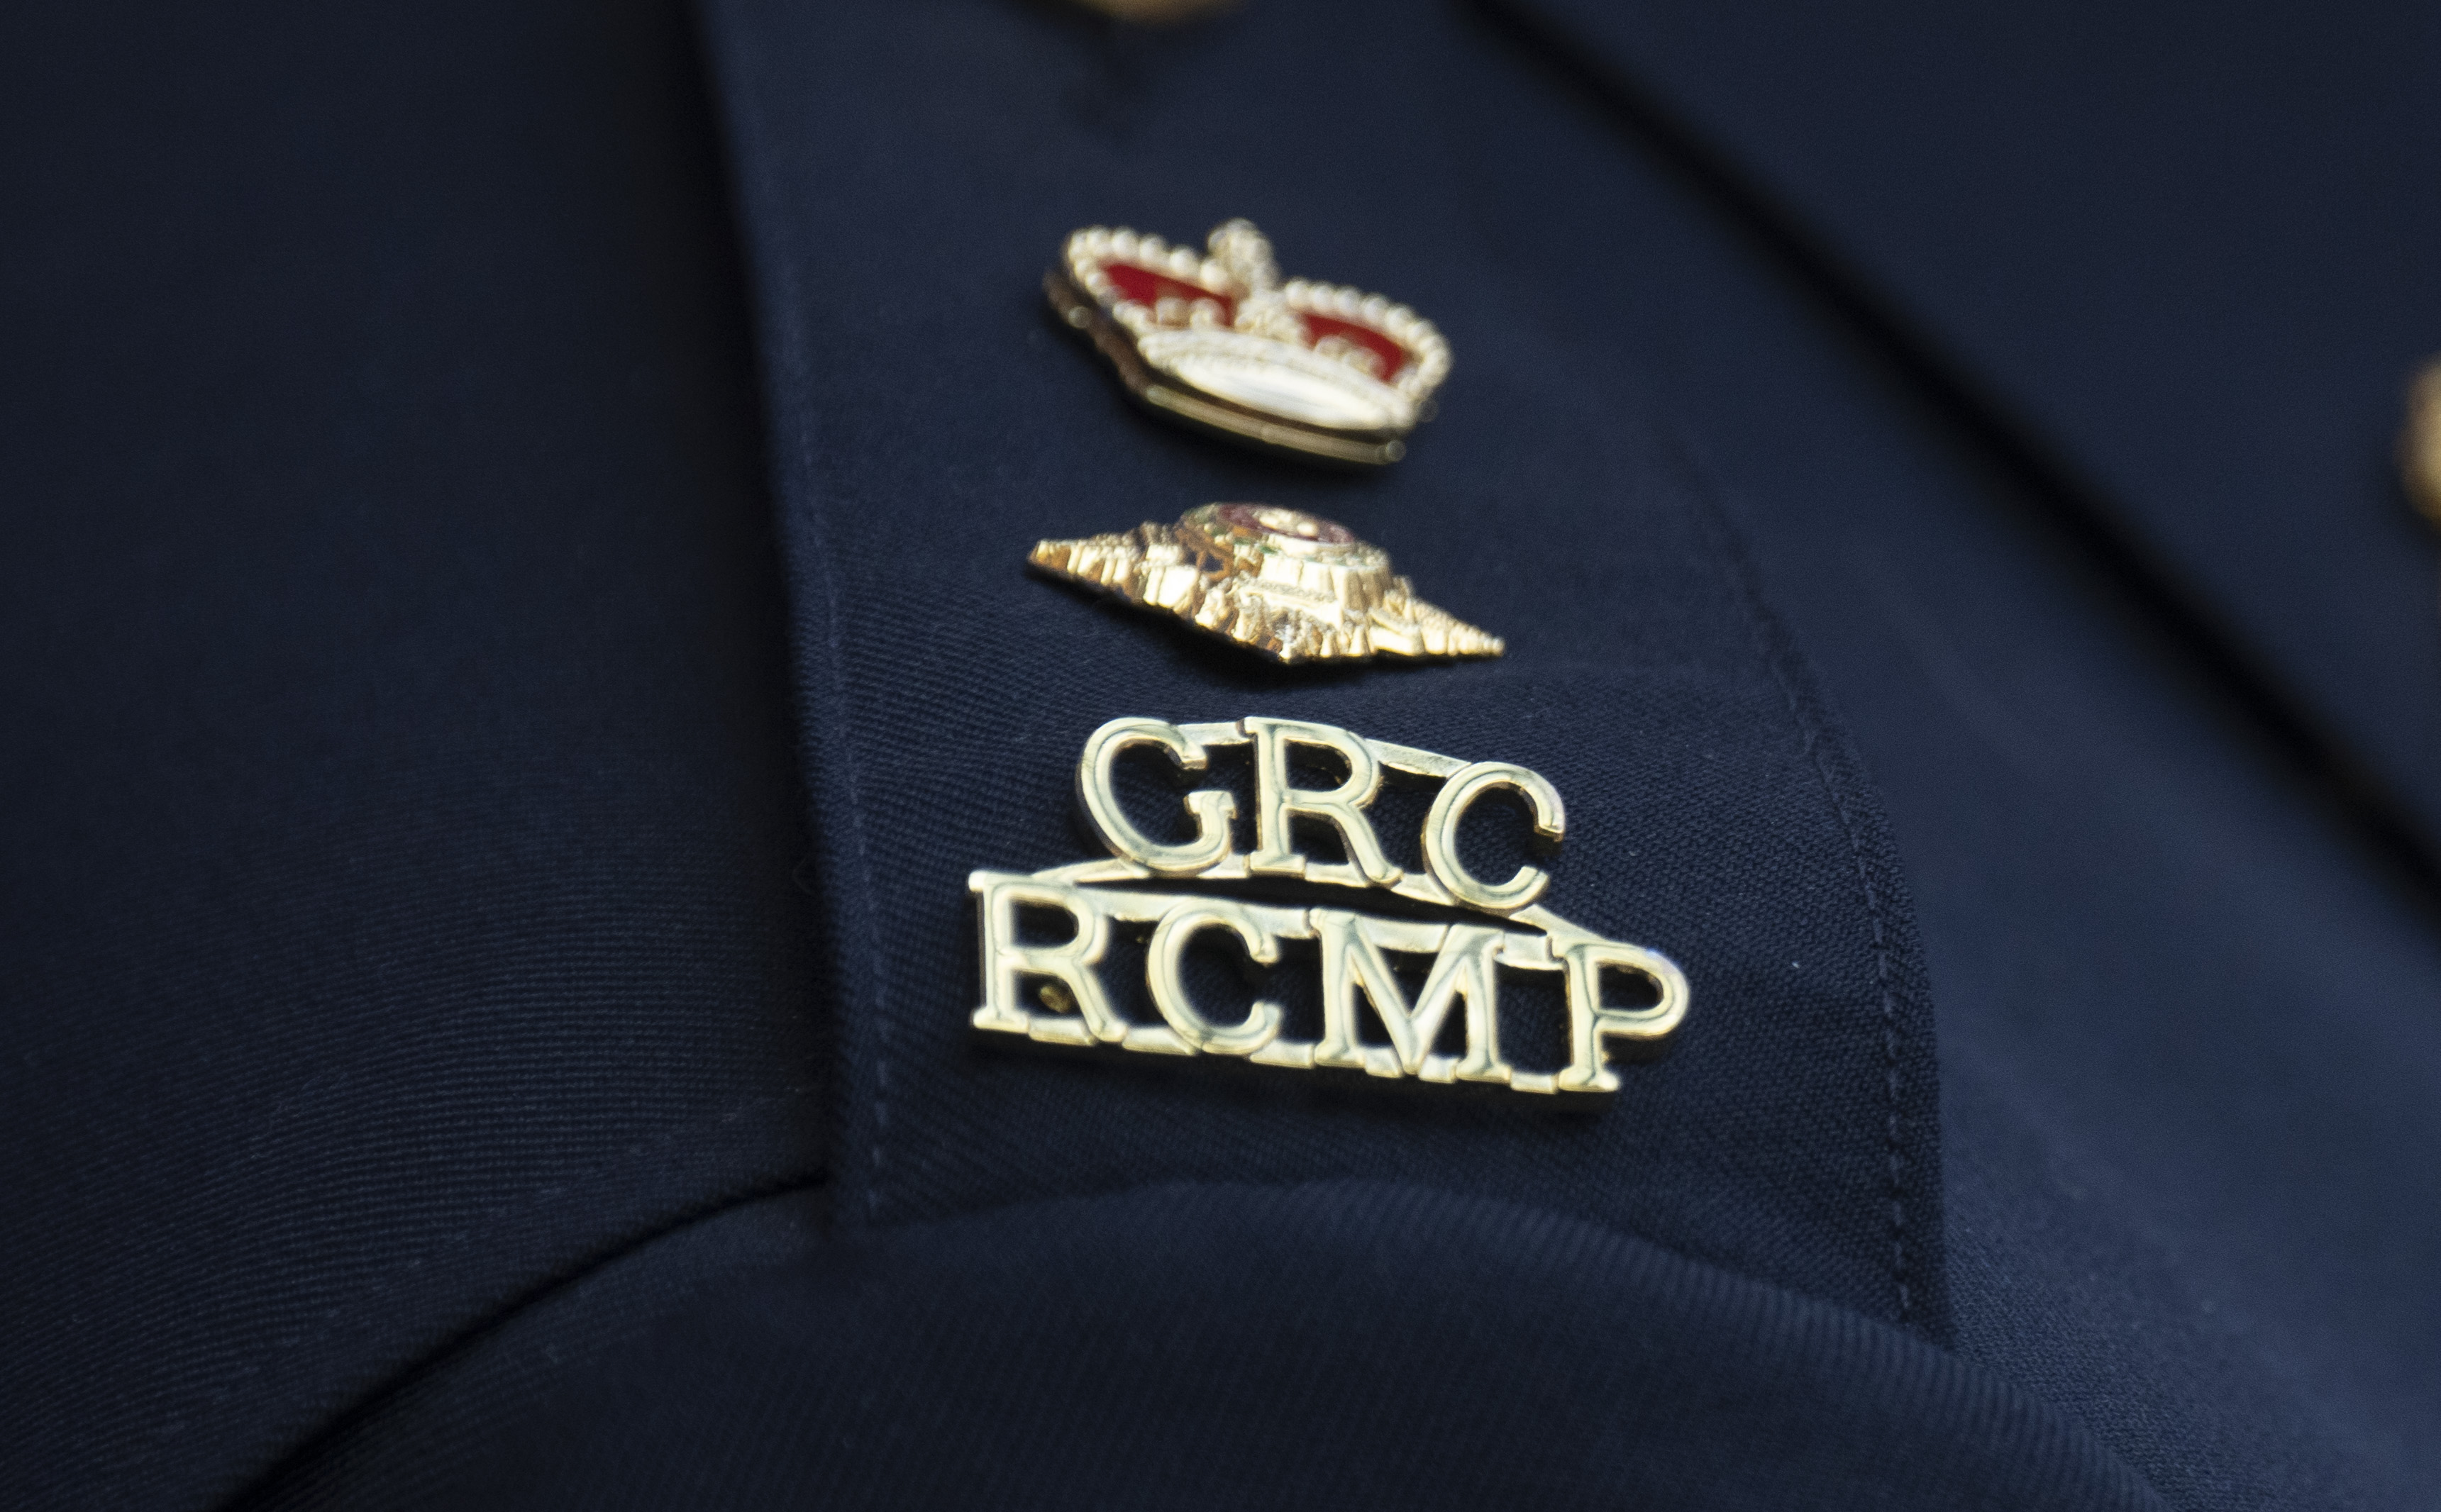 Report alleges RCMP mistreatment of homeless Indigenous women in NWT